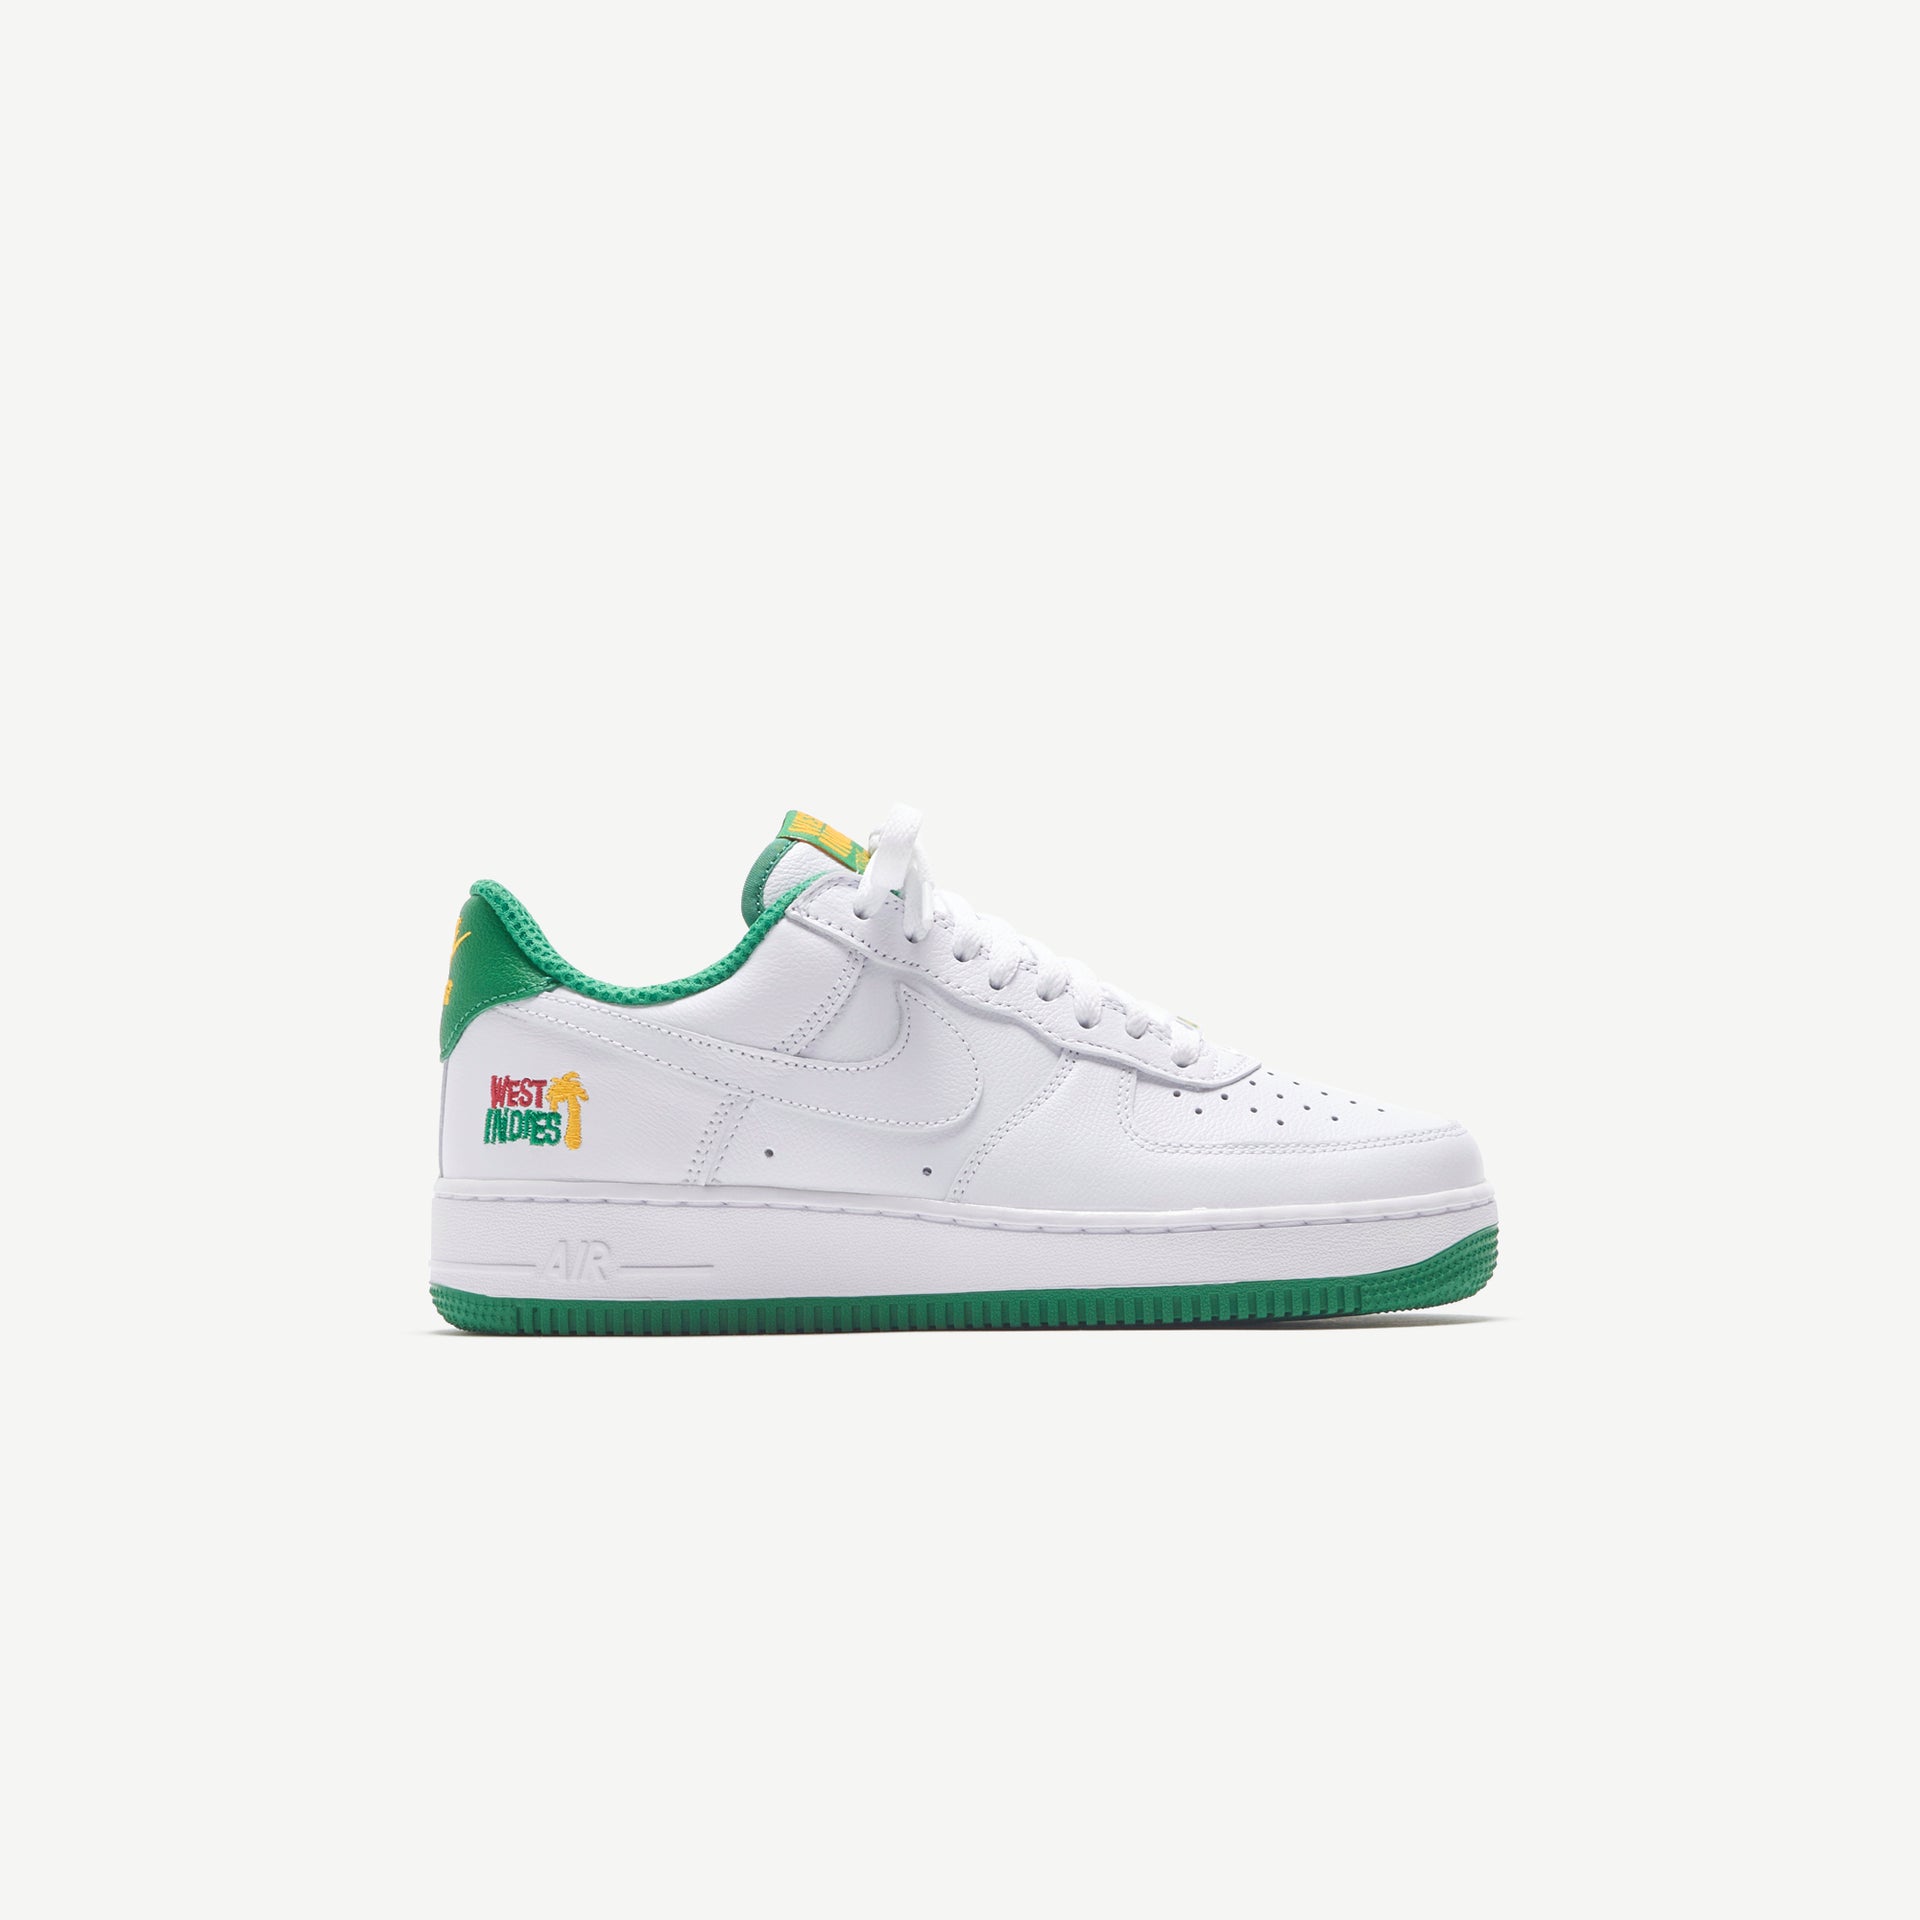 Nike Air Force 1 Low Retro "West Indies" - White / Classic Green